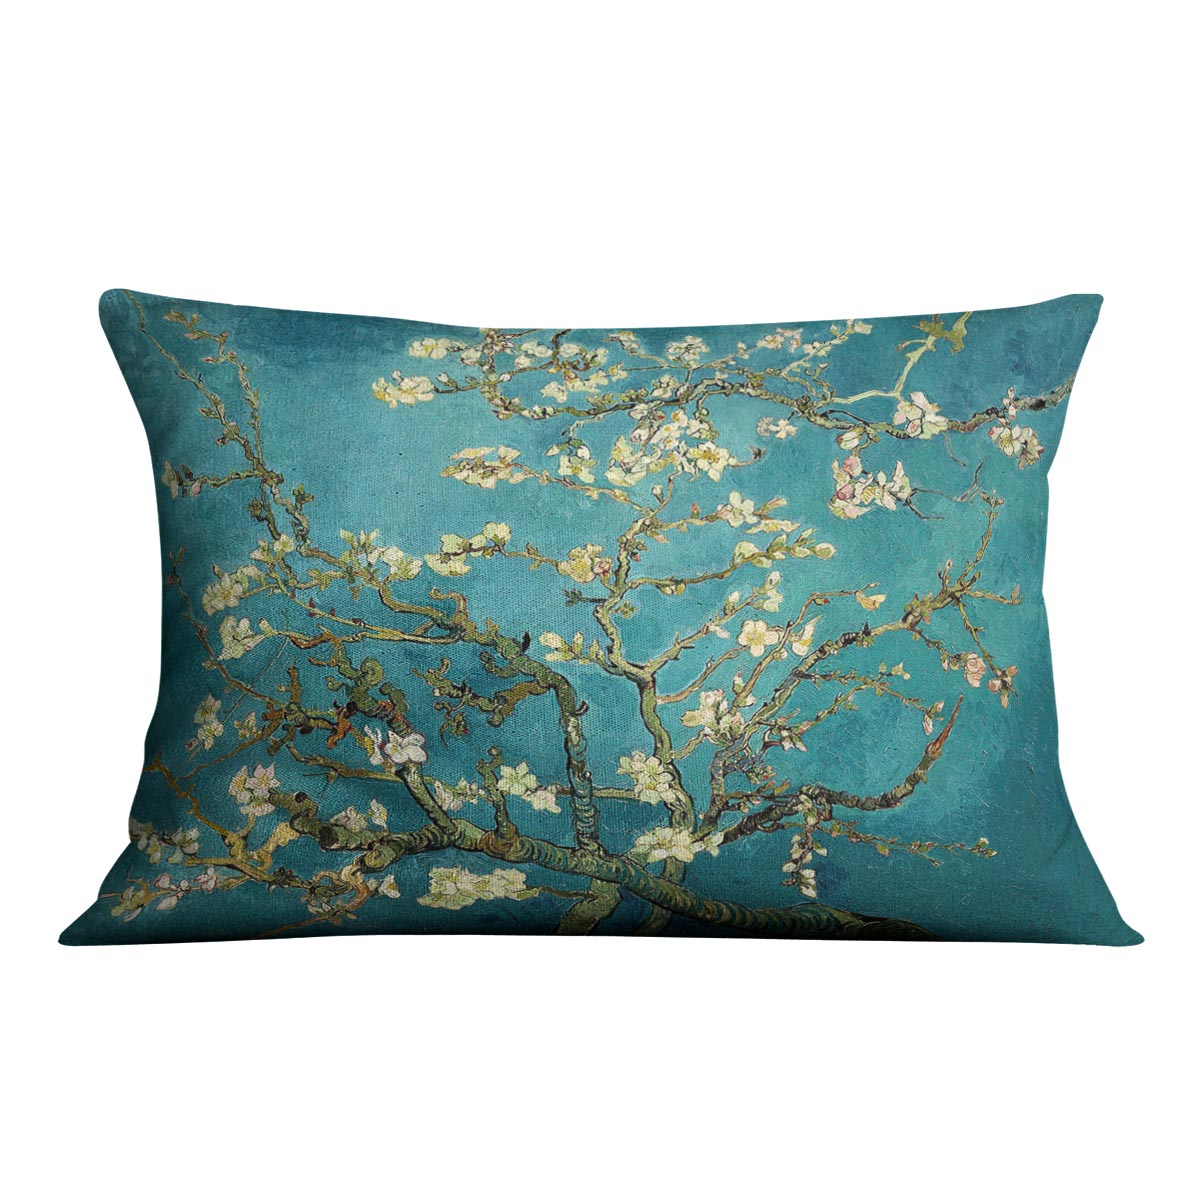 Blossoming Almond Tree by Van Gogh Cushion